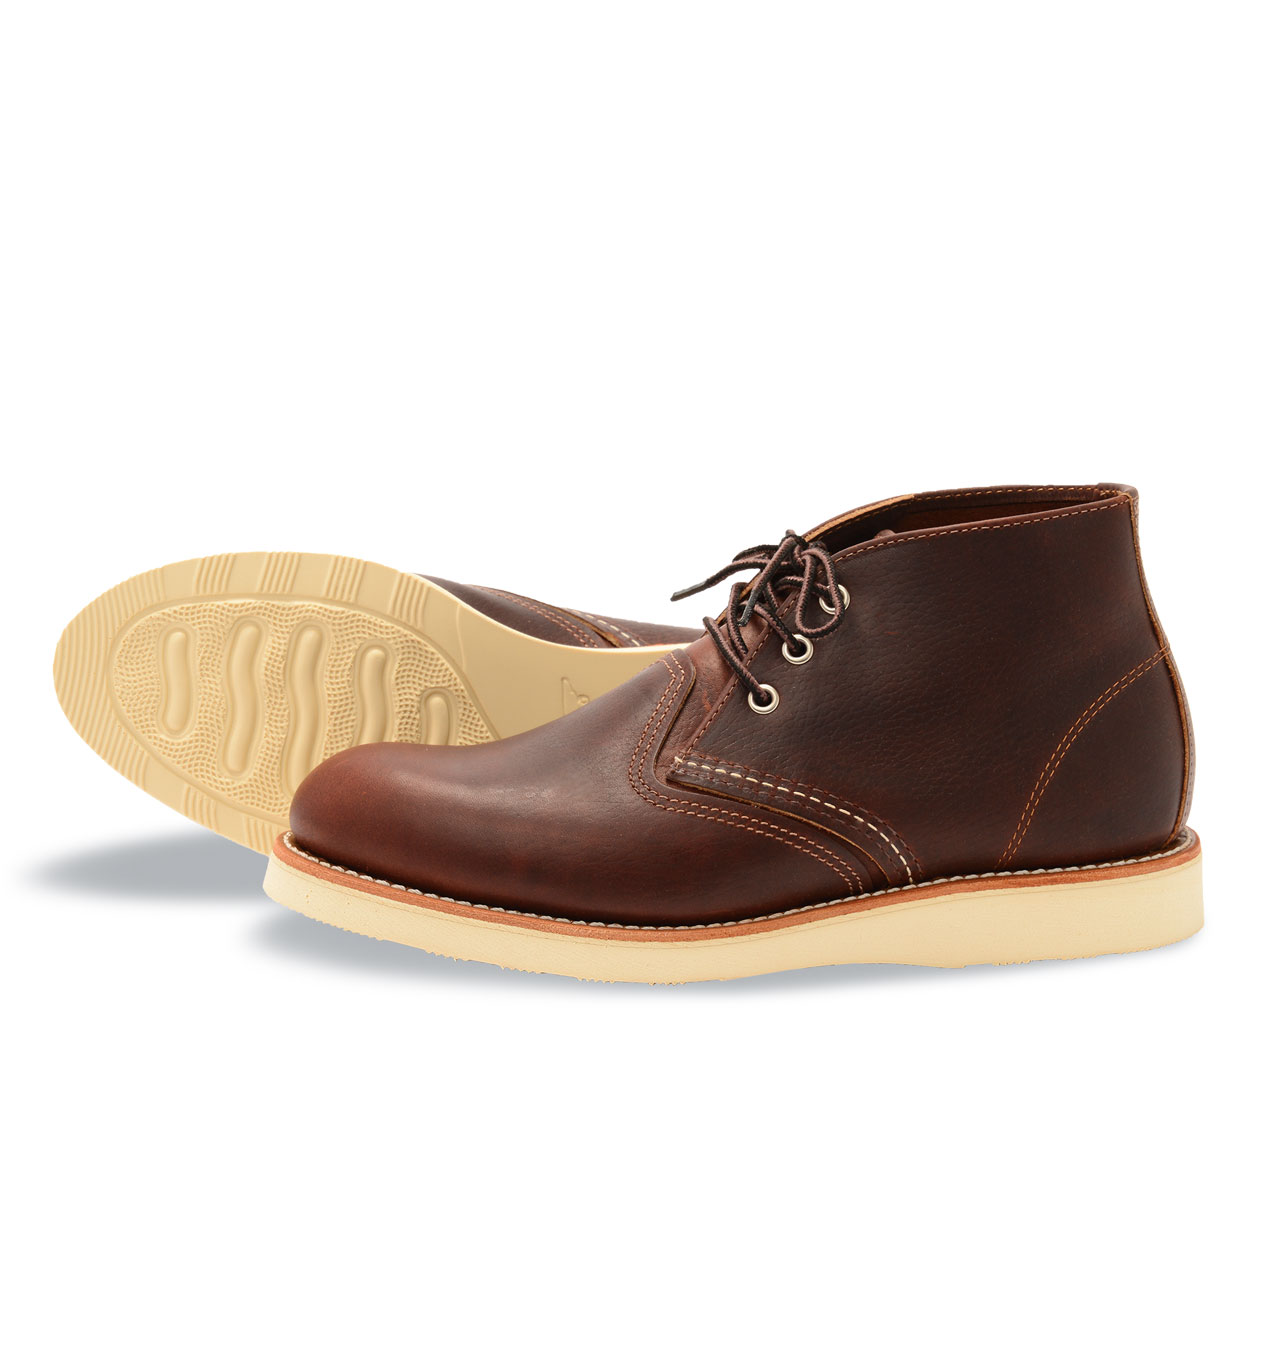 Red Wing Shoes 3141 EE Work Chukka - Briar Oil Slick